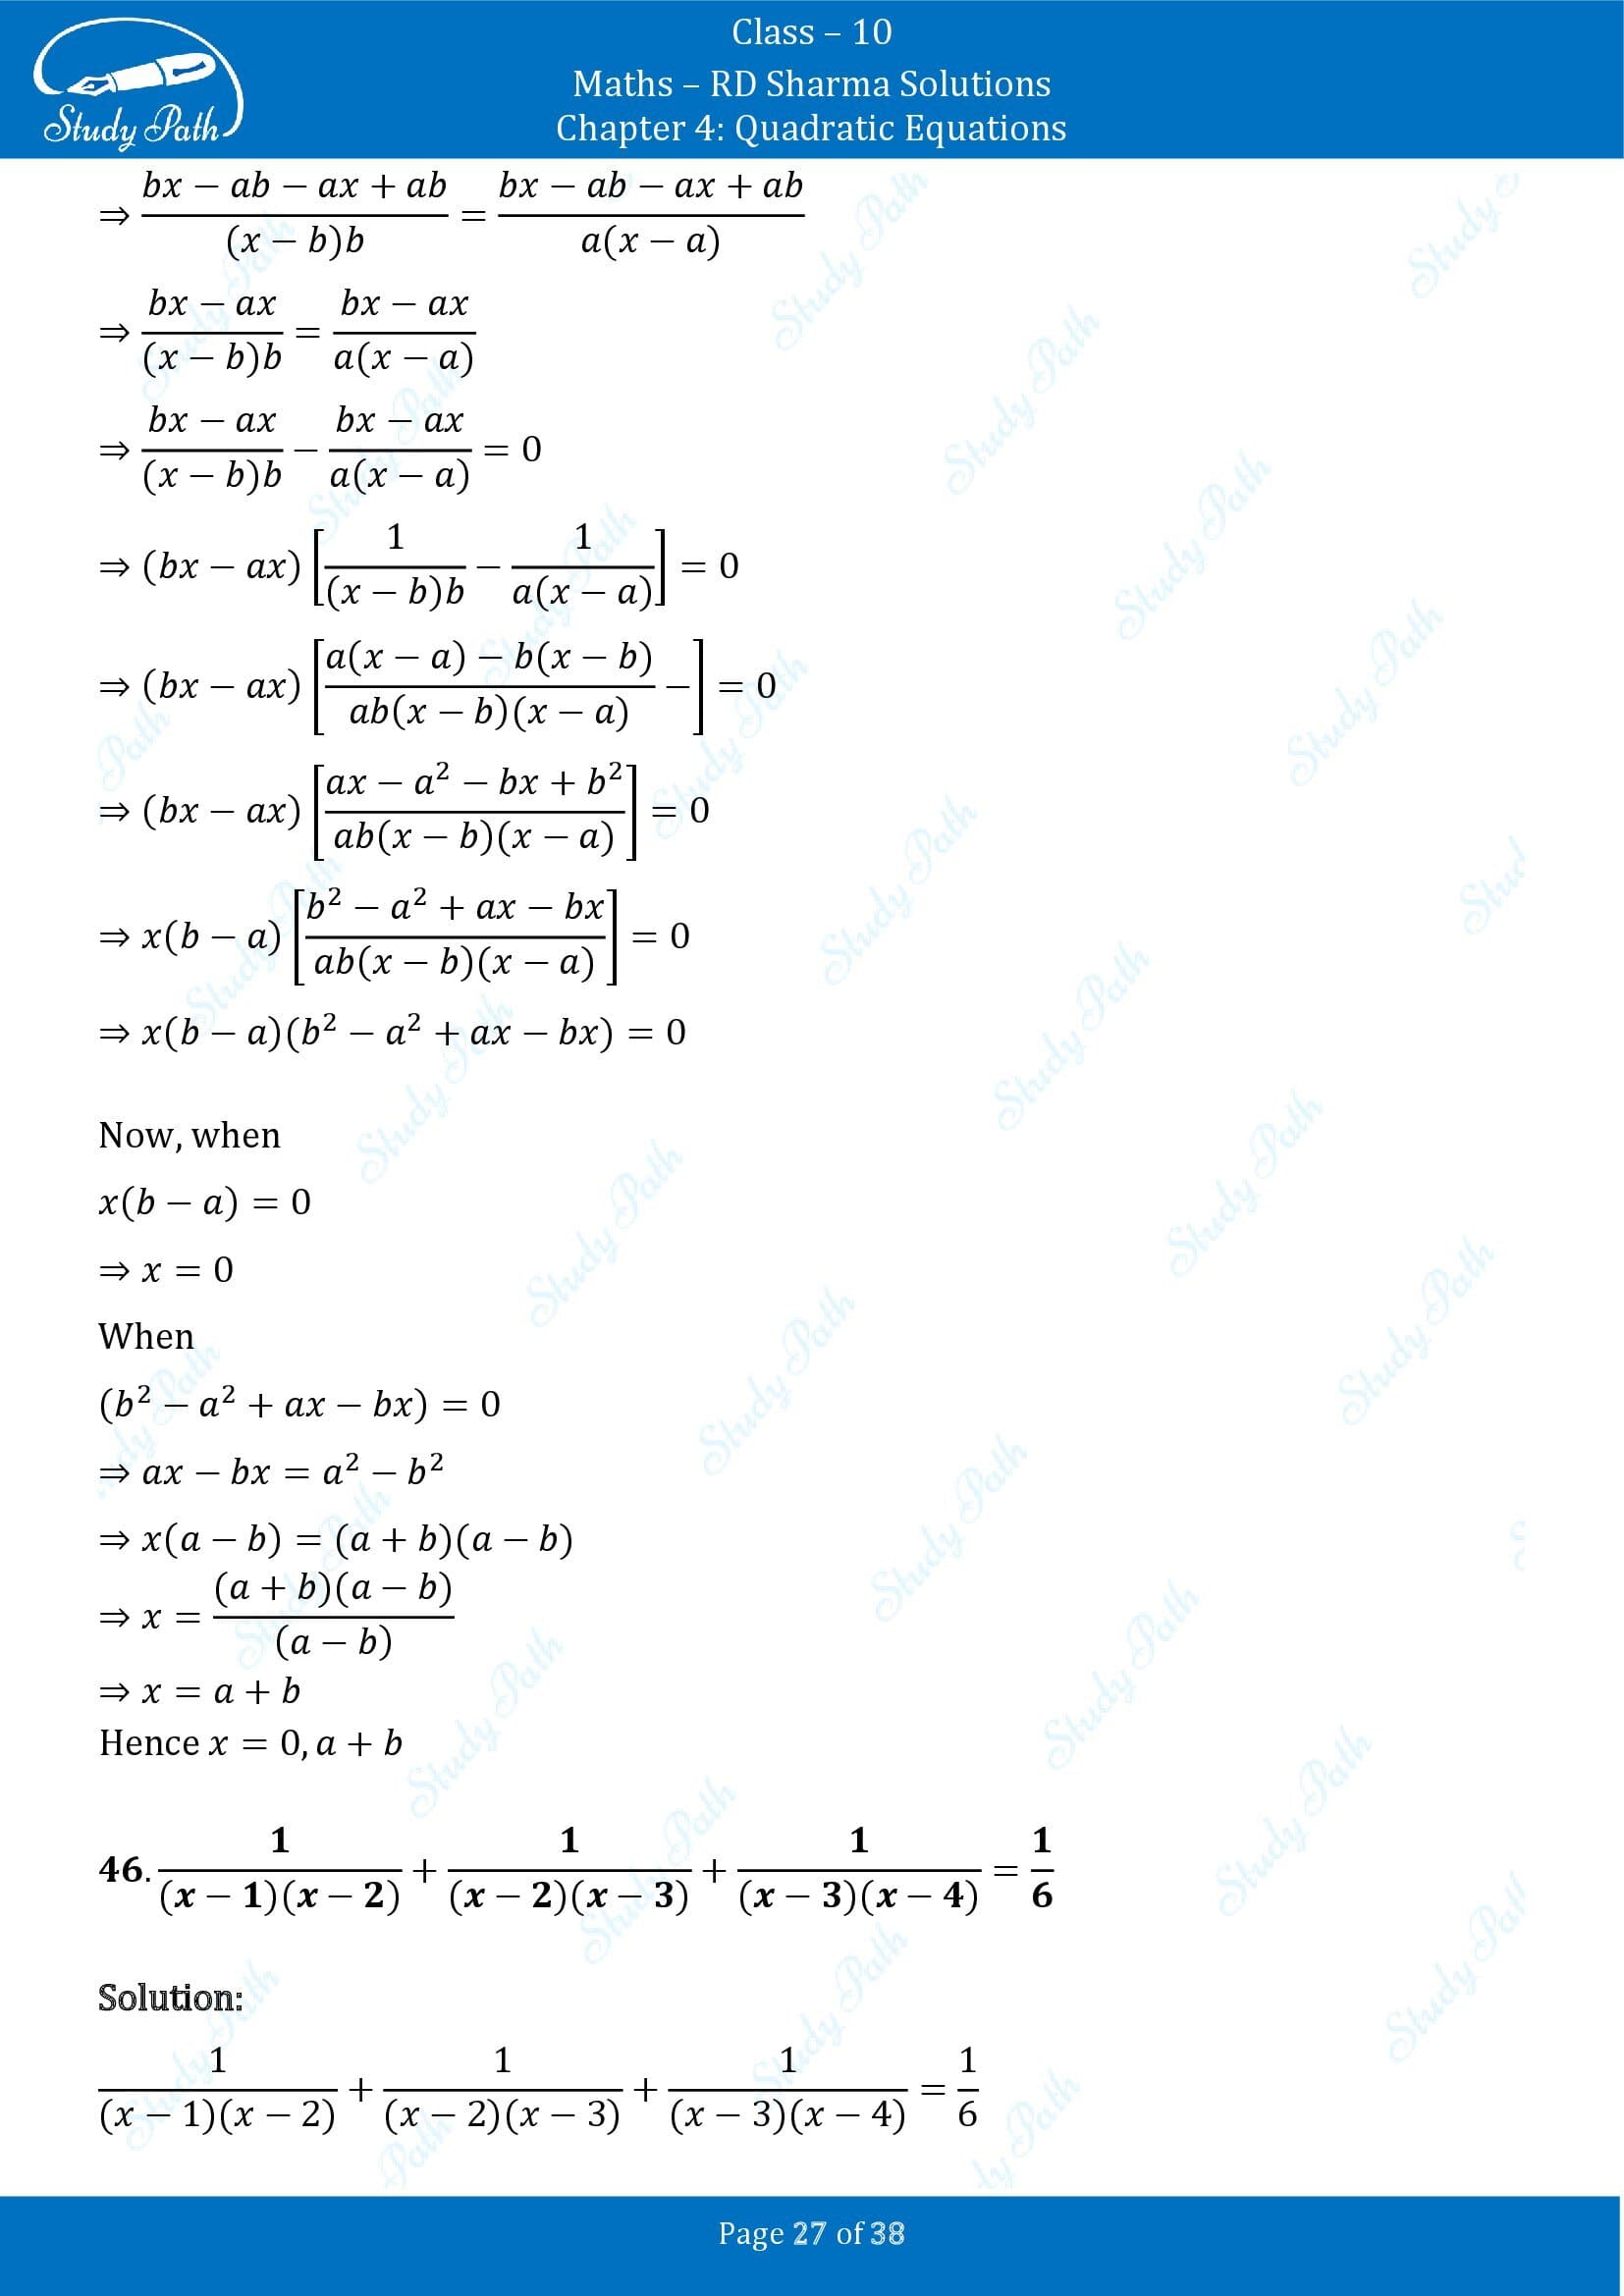 RD Sharma Solutions Class 10 Chapter 4 Quadratic Equations Exercise 4.3 00027